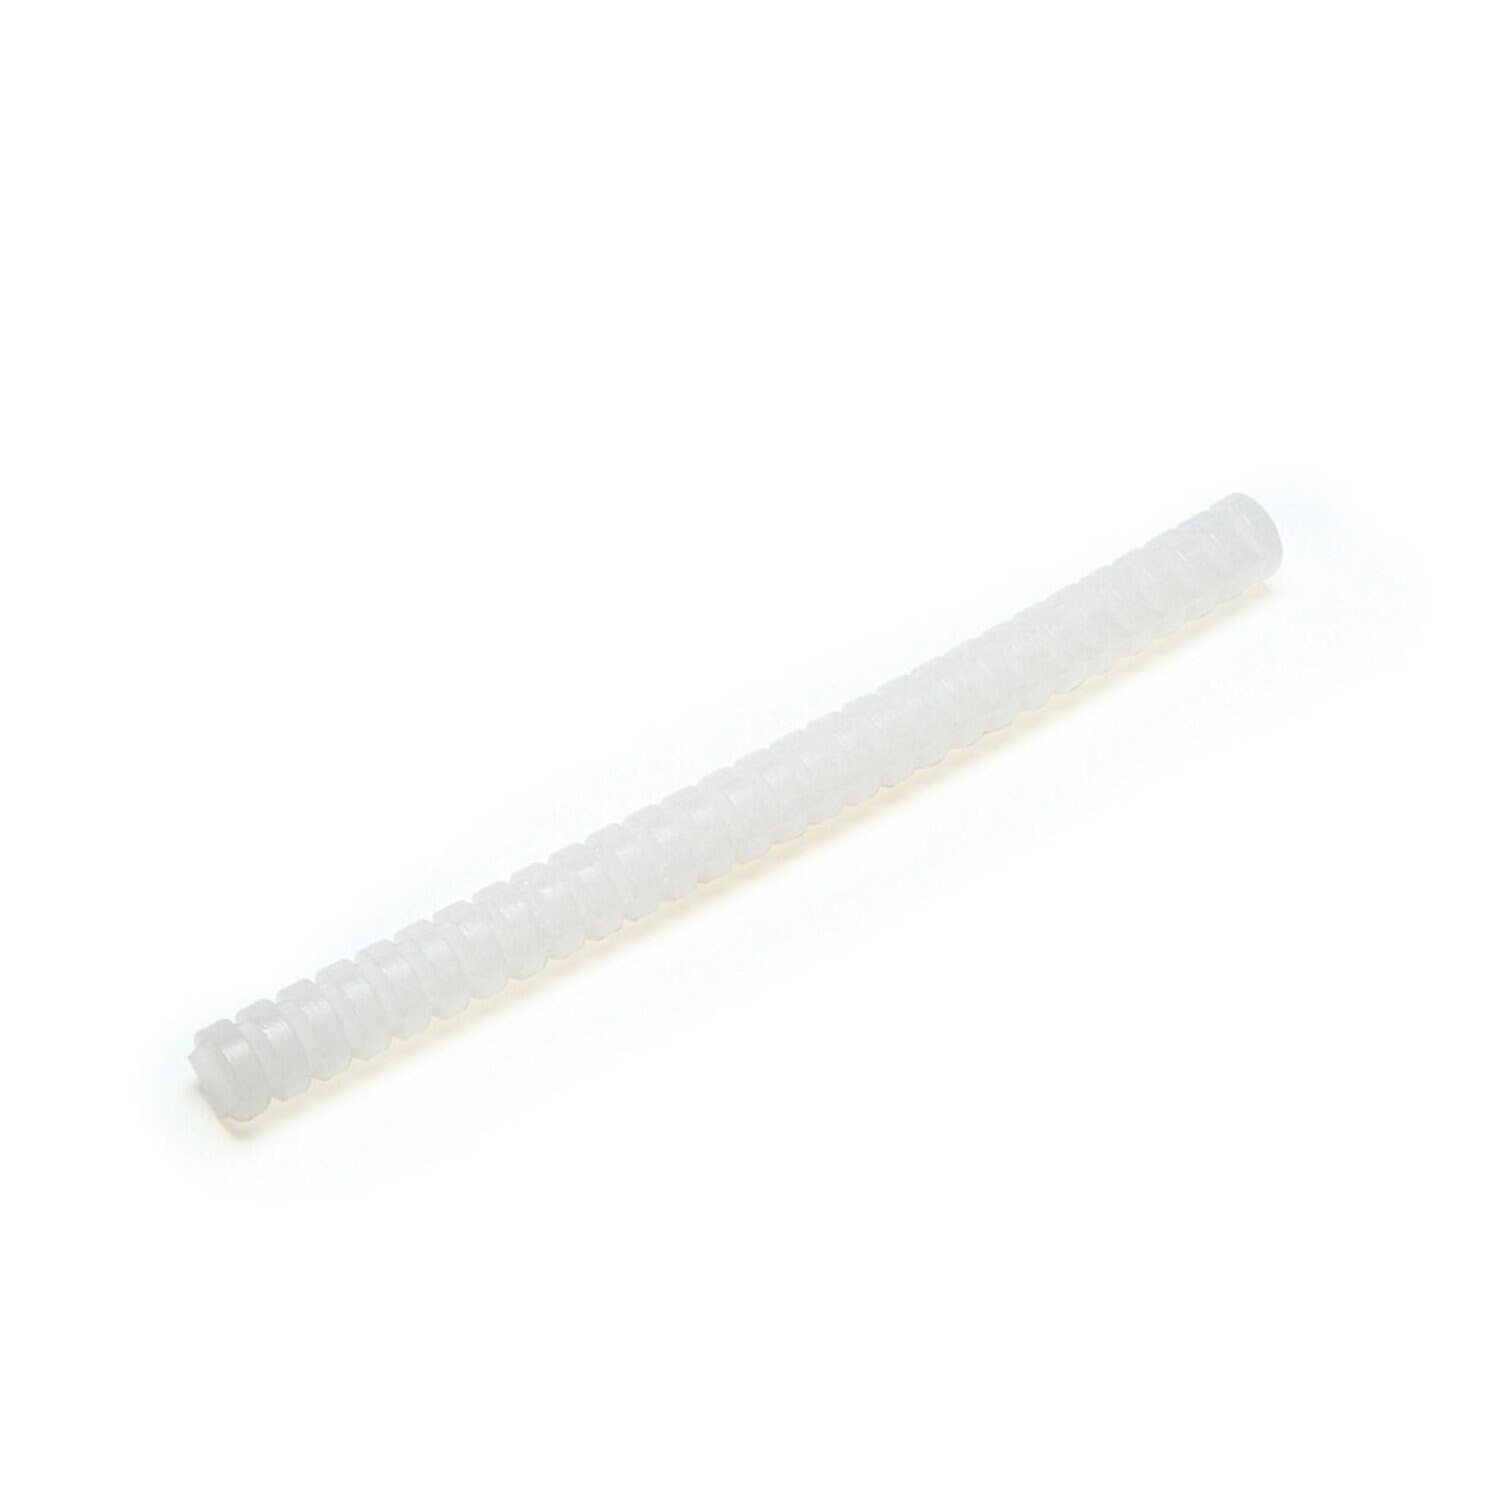 7100042234 - 3M Hot Melt Adhesive 3792LM AE, Clear, 0.45 in x 12 in, 11 lb/case